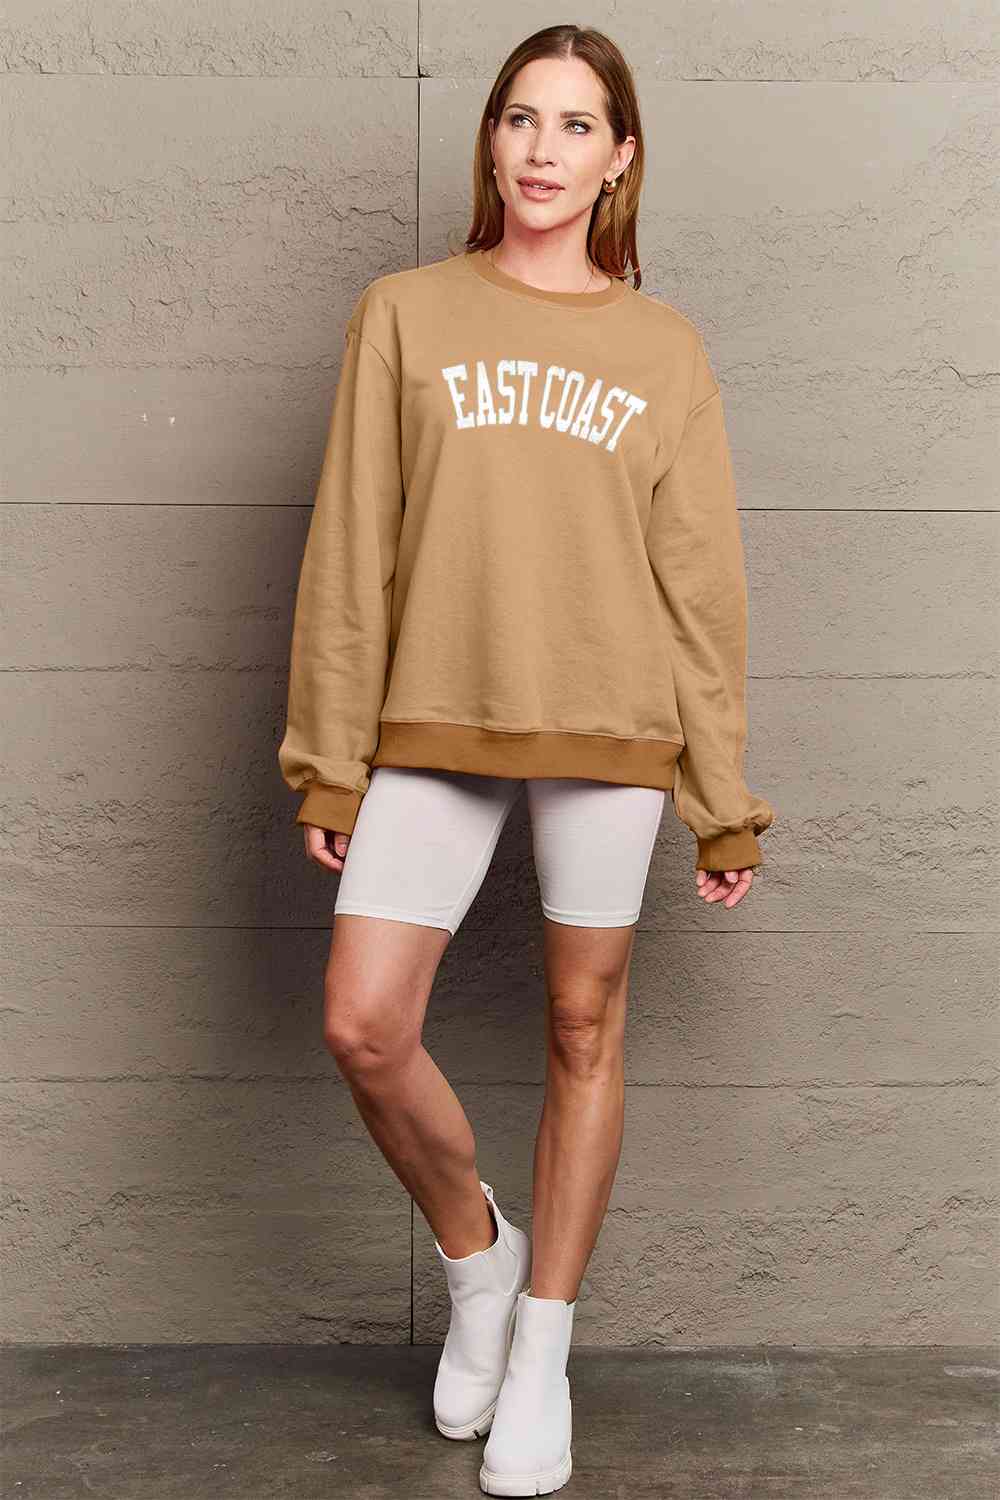 Simply Love Full Size EAST COAST Graphic Sweatshirt - By Baano